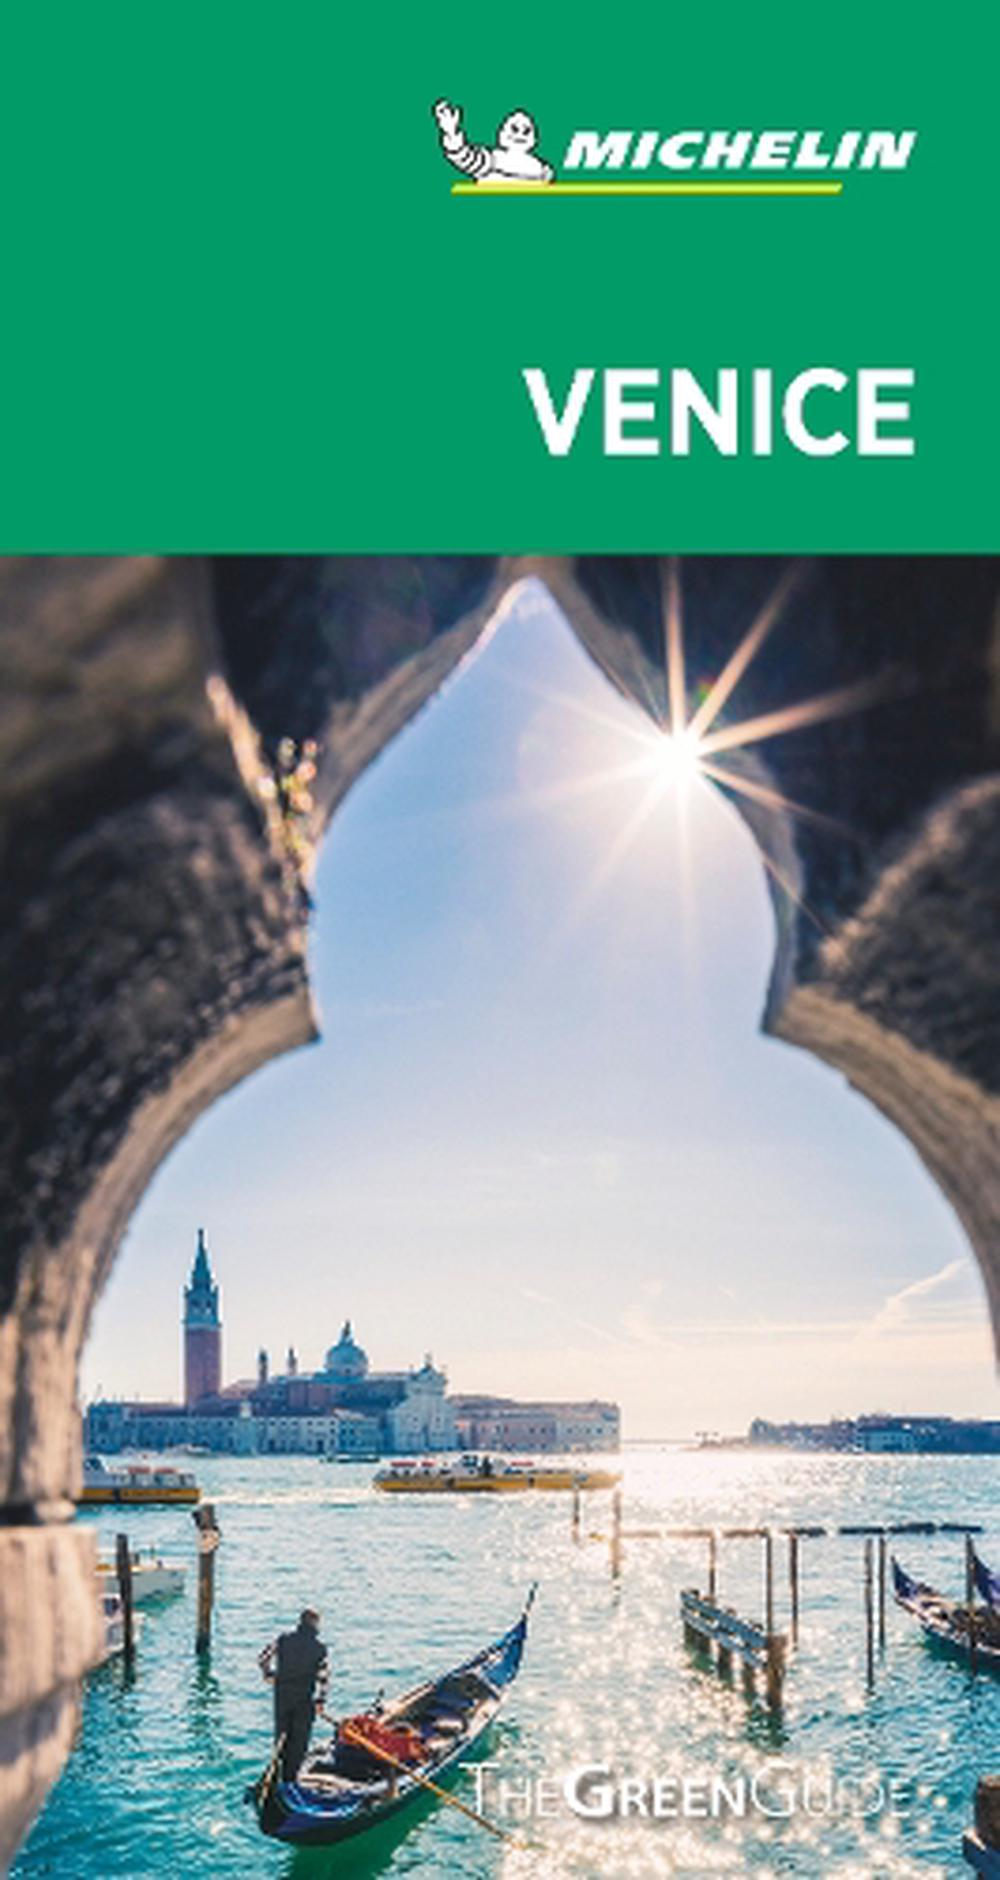 Venice and the Michelin Green Guide Travel Guide by Michelin (English) eBay